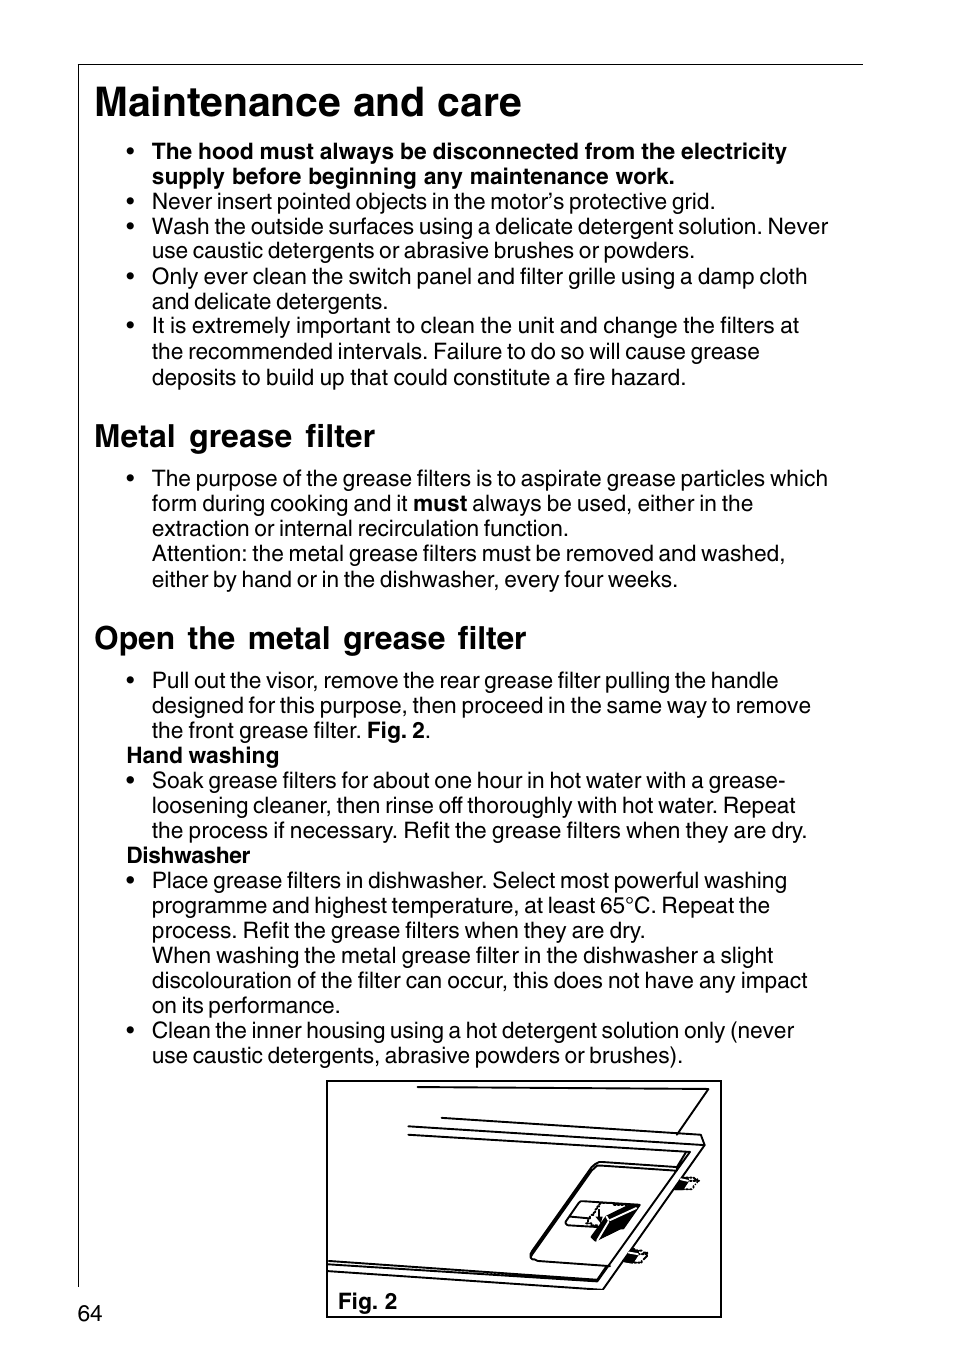 Maintenance and care, Metal grease filter, Open the metal grease filter |  AEG COOKER HOOD DF6260-ML/1 User Manual | Page 64 / 80 | Original mode